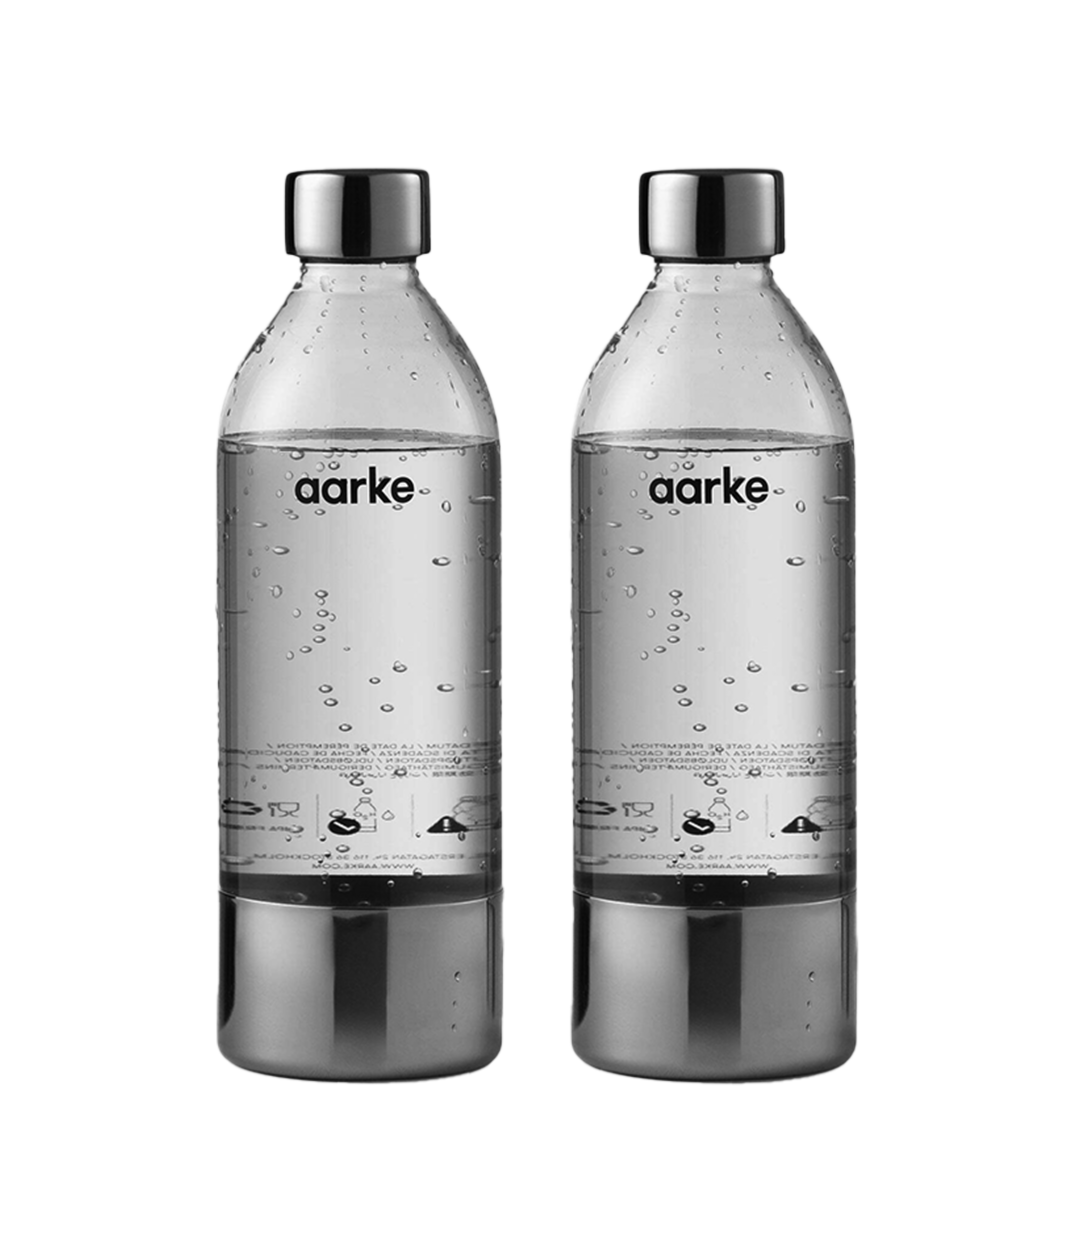 aarke Extra PET Stainless Steel 1L bottle (for use Carbonator)